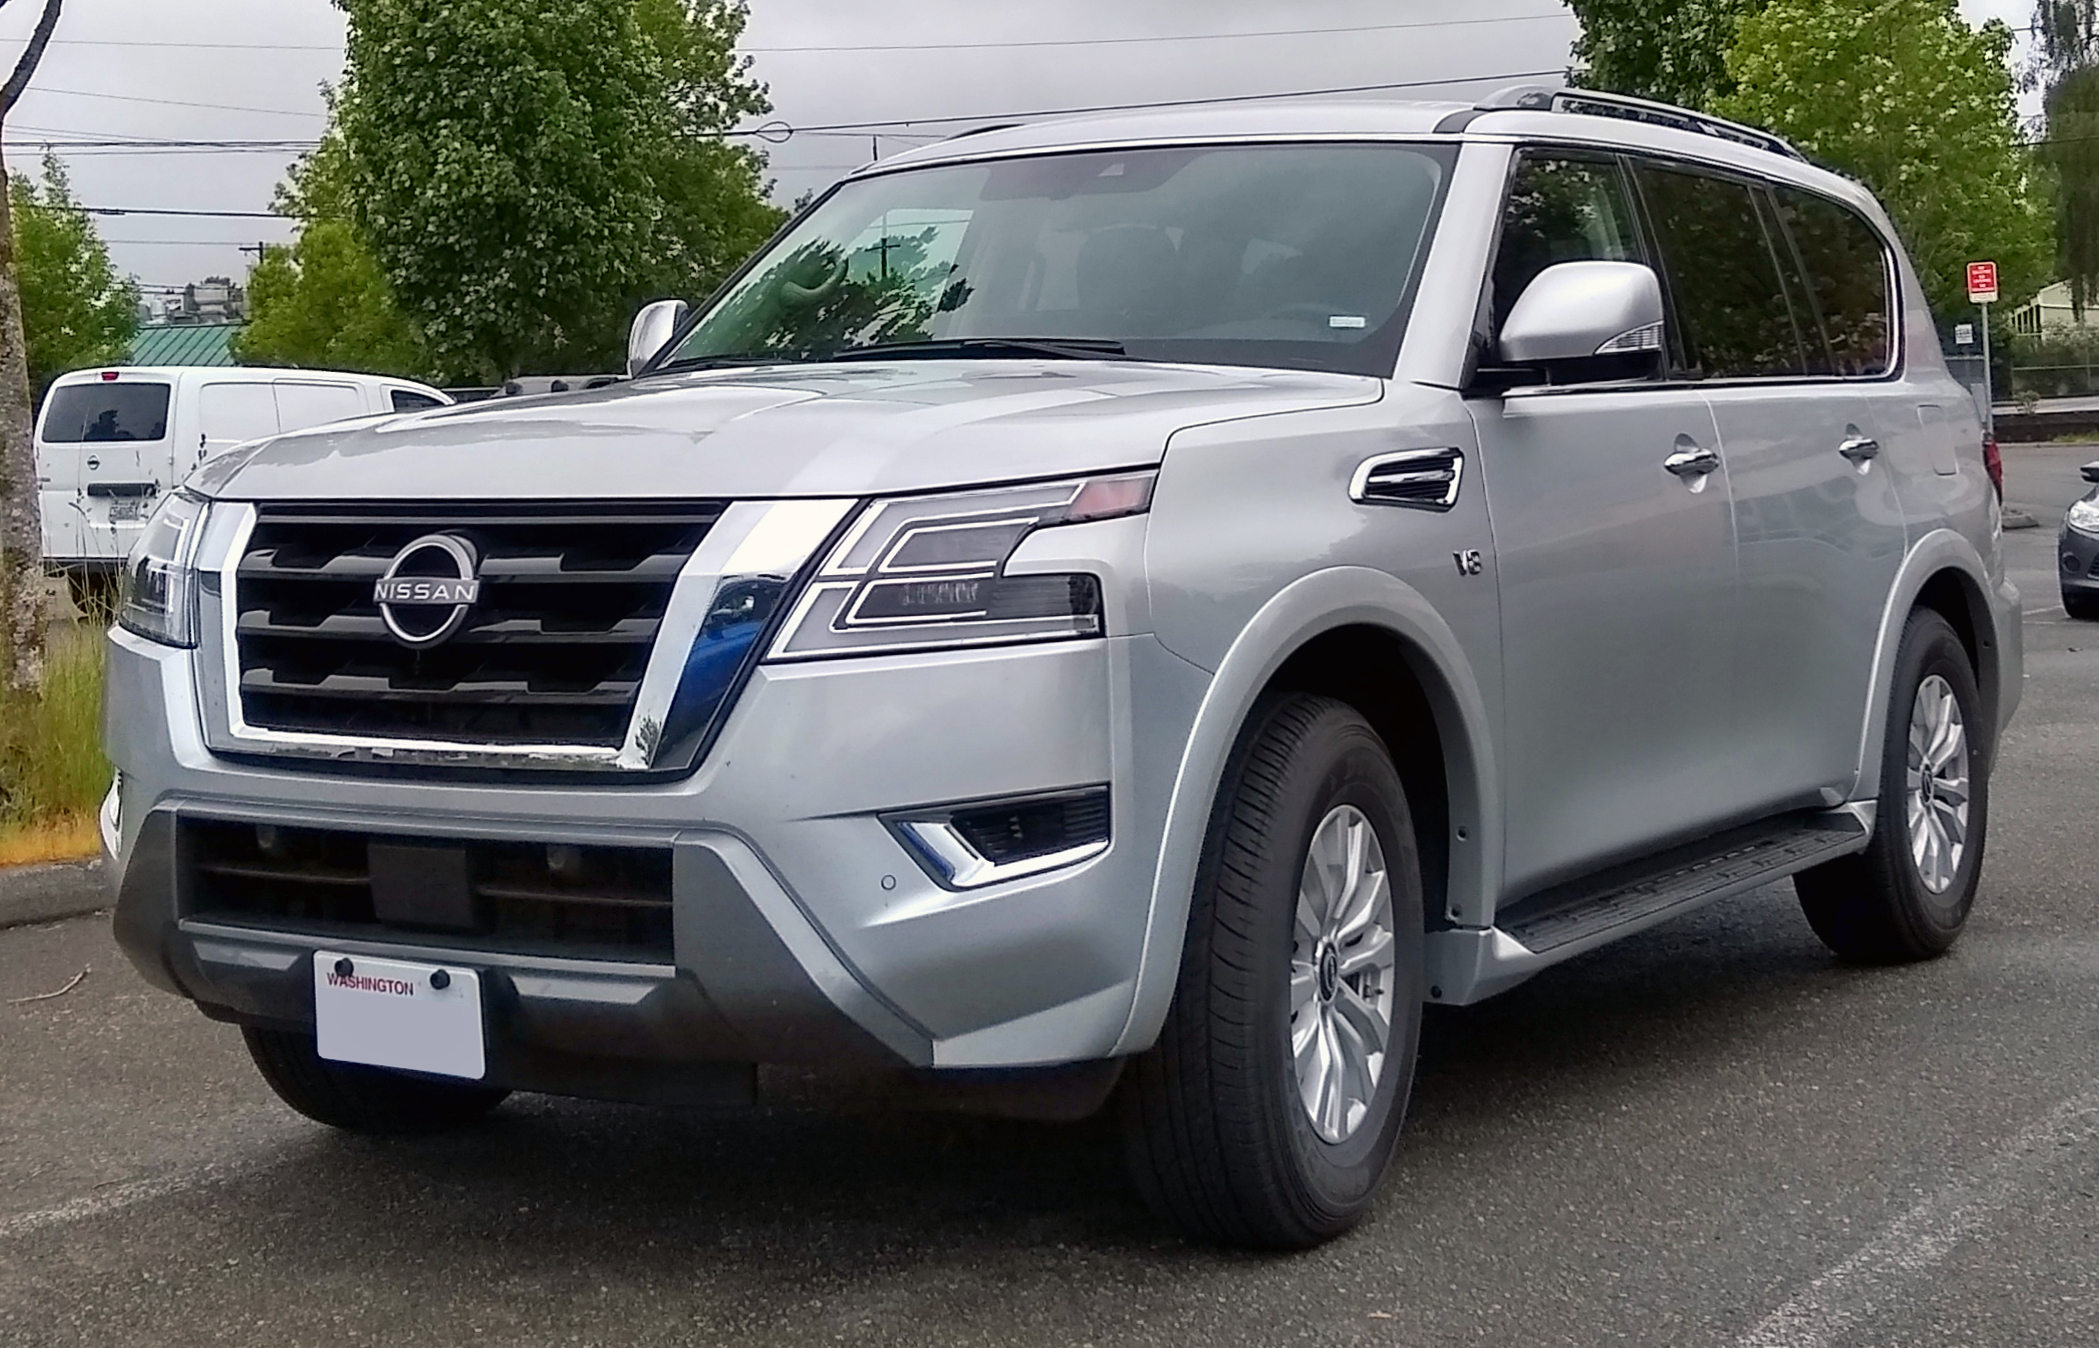 https://upload.wikimedia.org/wikipedia/commons/d/dc/2021_Nissan_Armada_SV_%28United_States%29_front_view_%28cropped%29.jpg